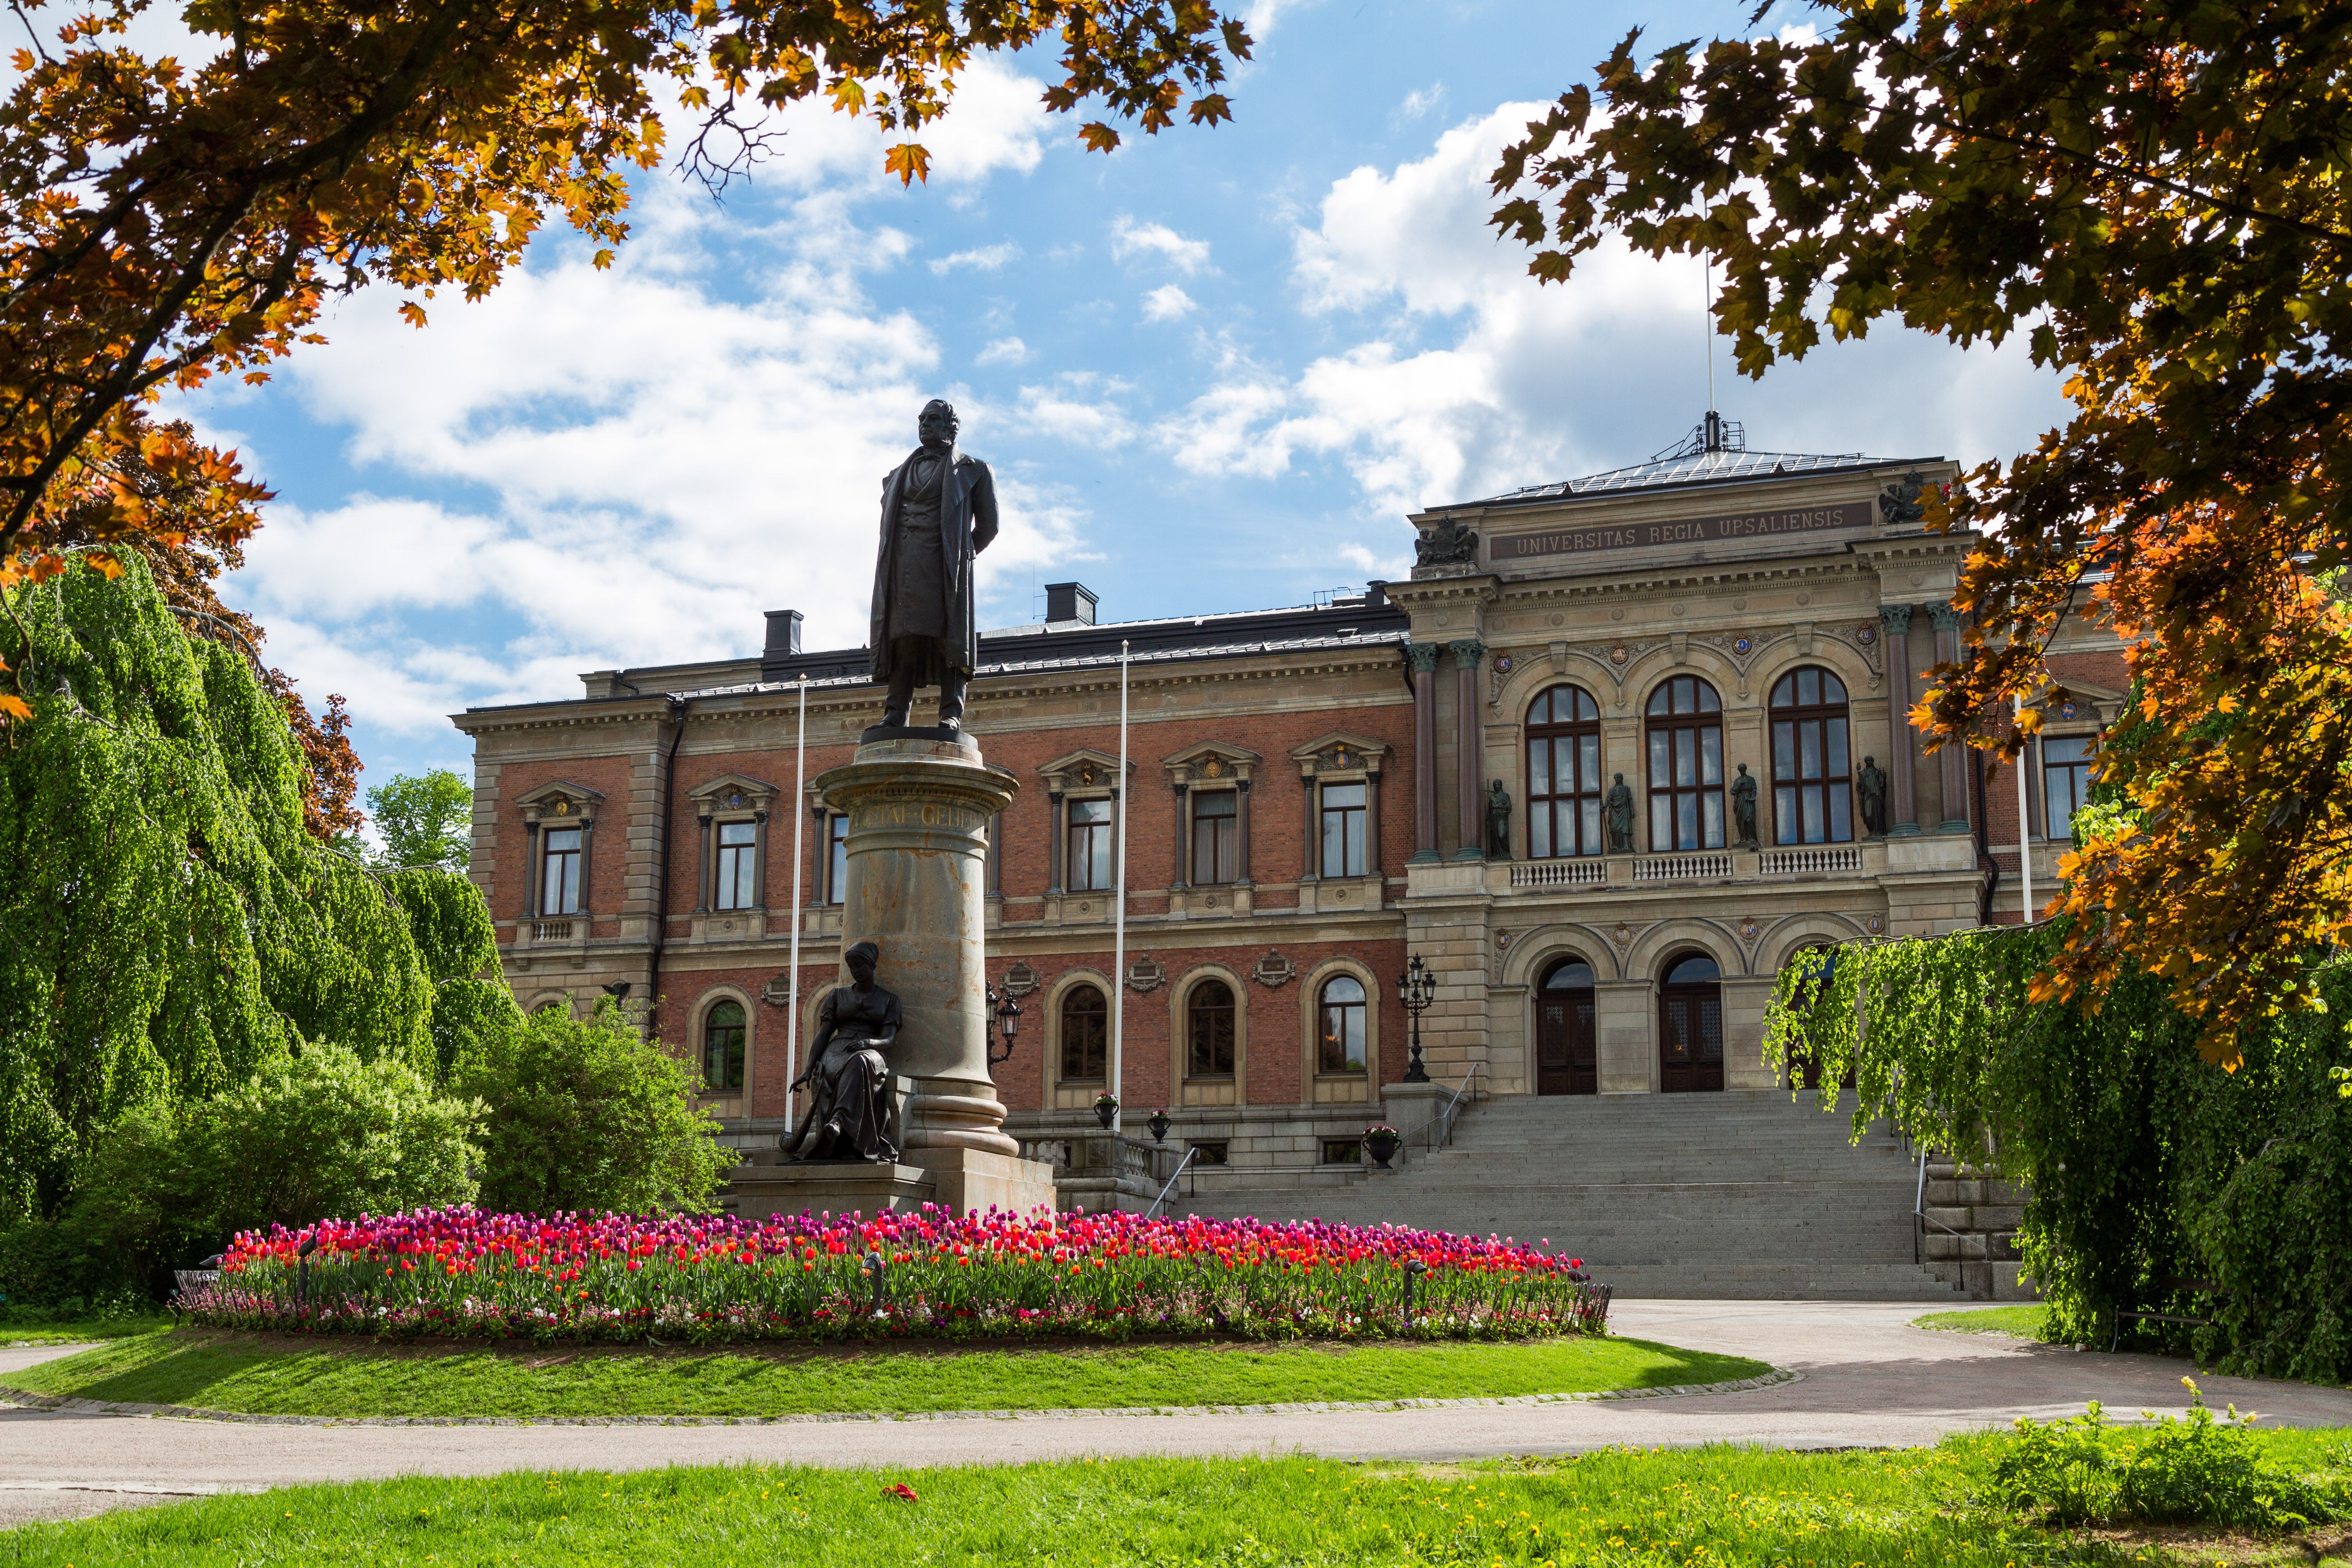 A statue, flowers and trees, in front of a 19th century building. Photo.